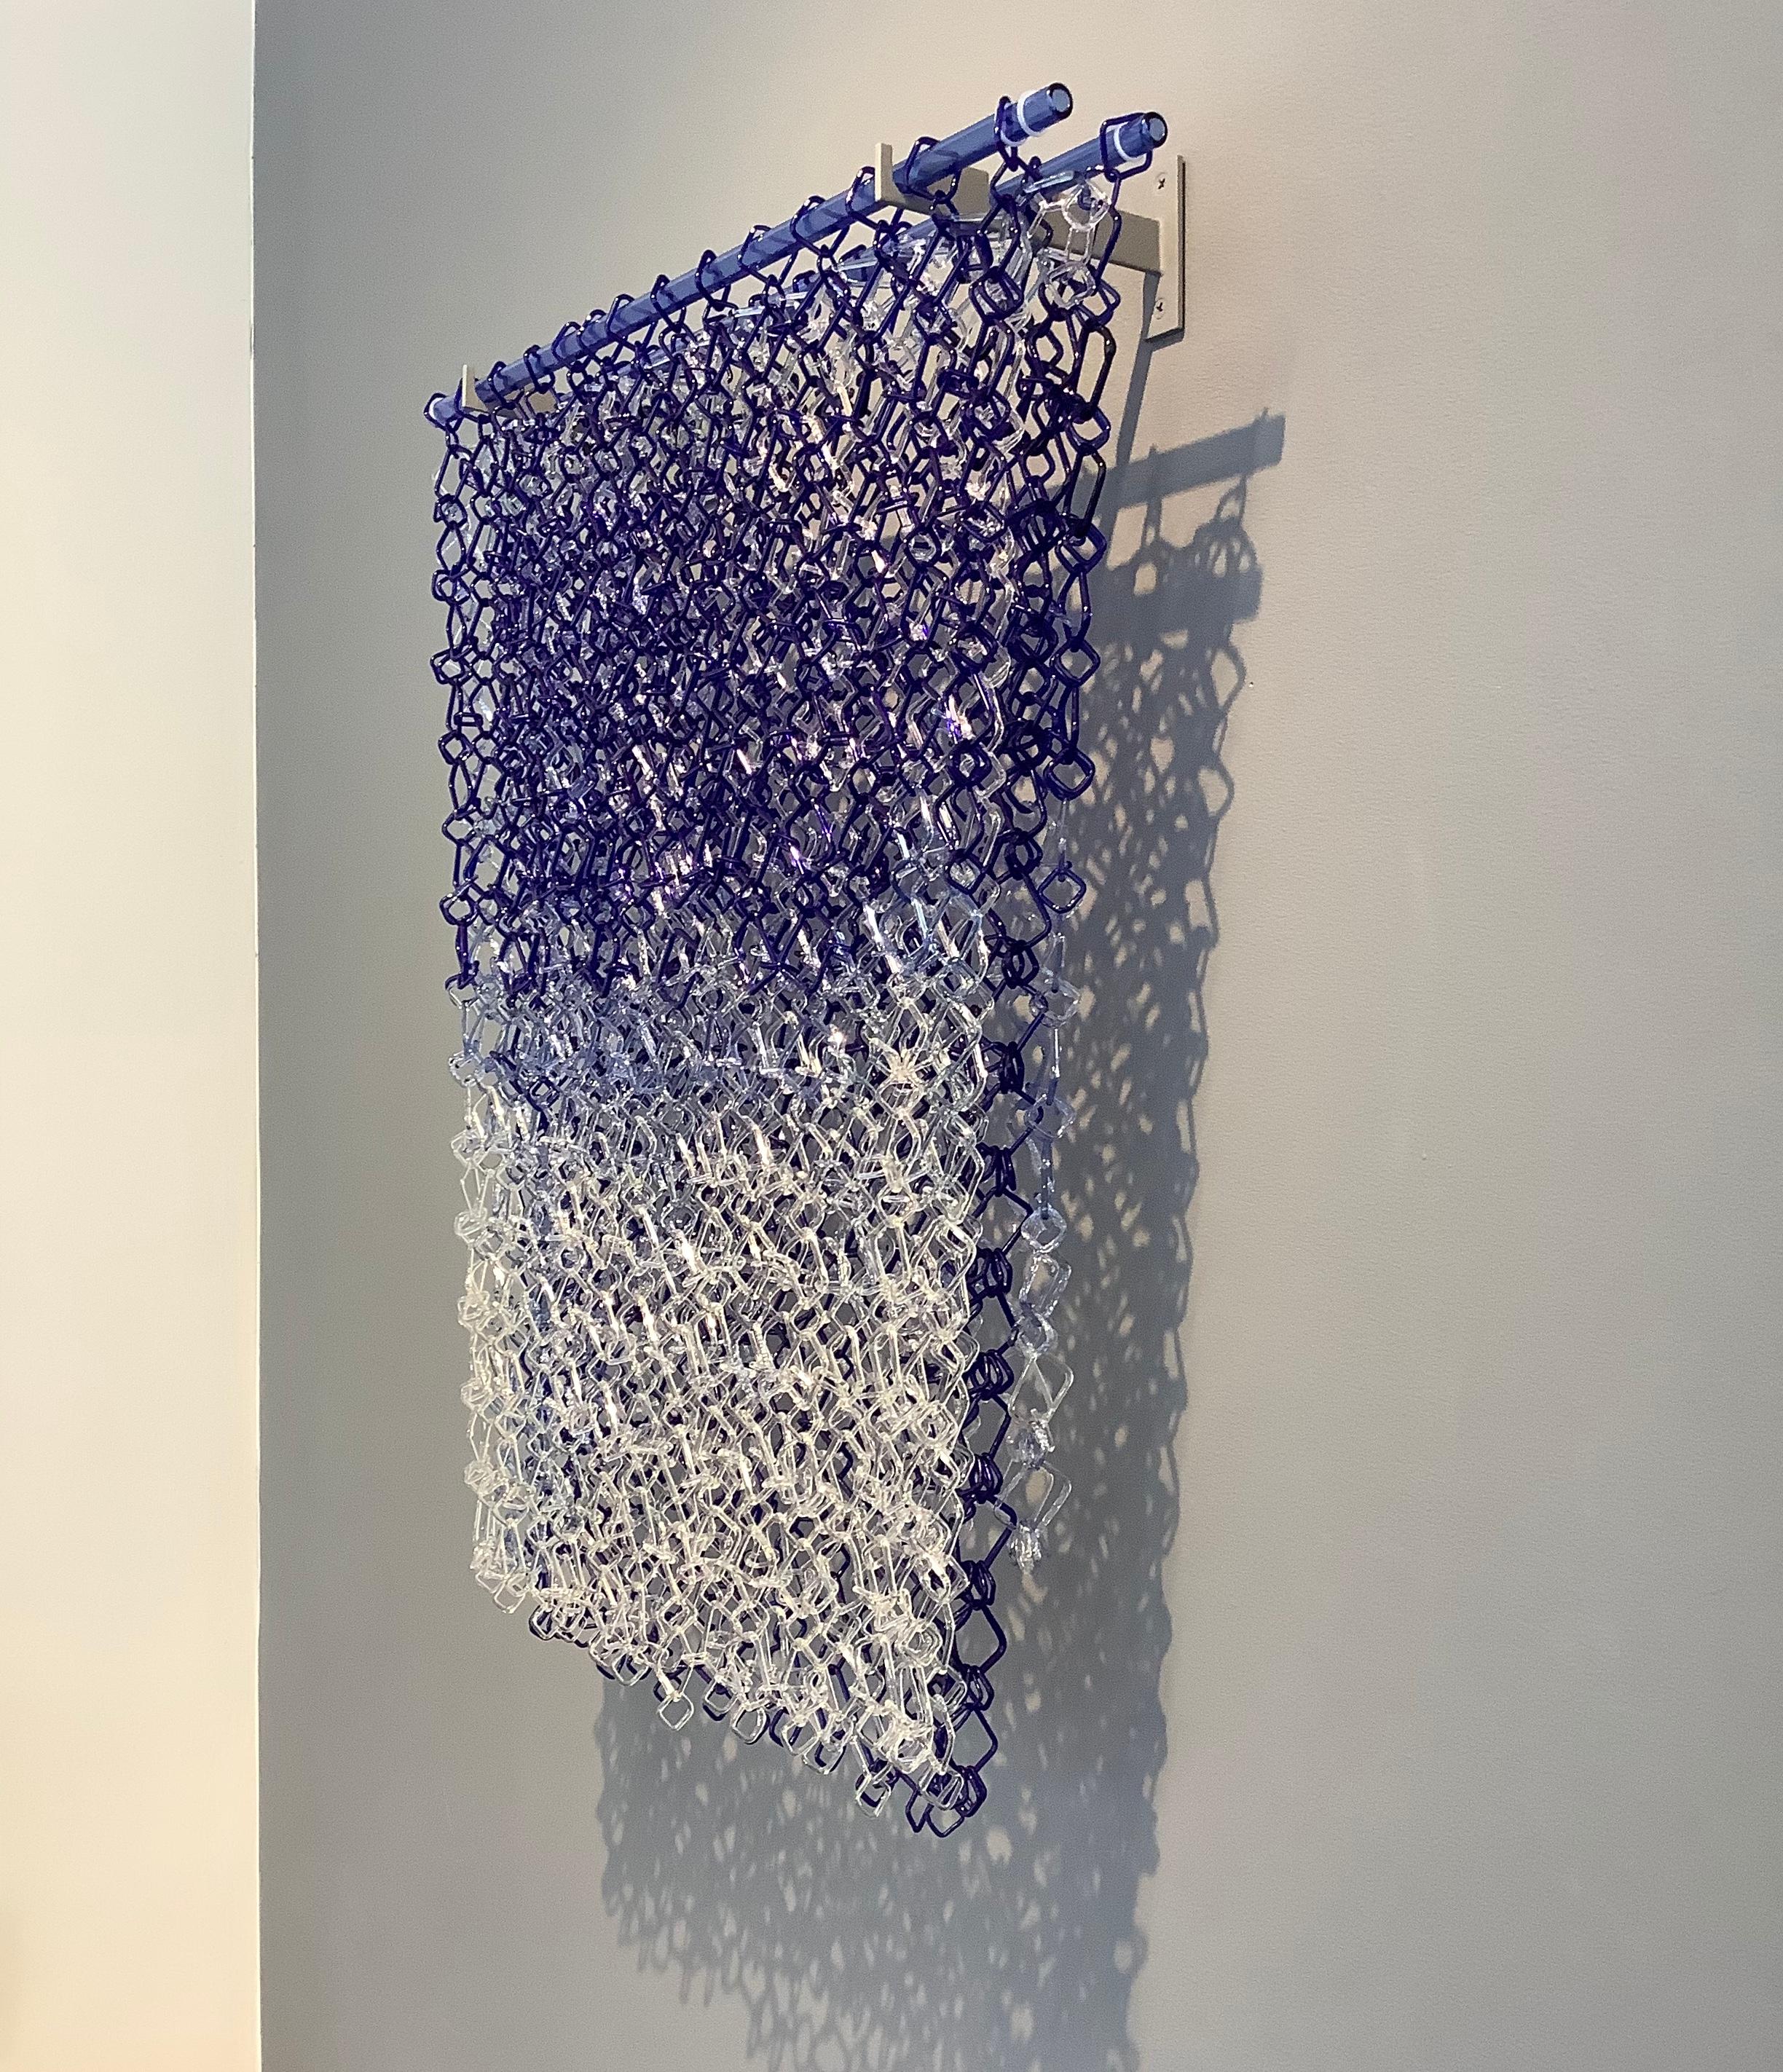 This hanging sculpture by David Licata is composed of square links of torch-worked borosilicate glass in shades of blue from dark cobalt at the top, pale translucent violet in the middle and clear links at the bottom.  The square links are joined